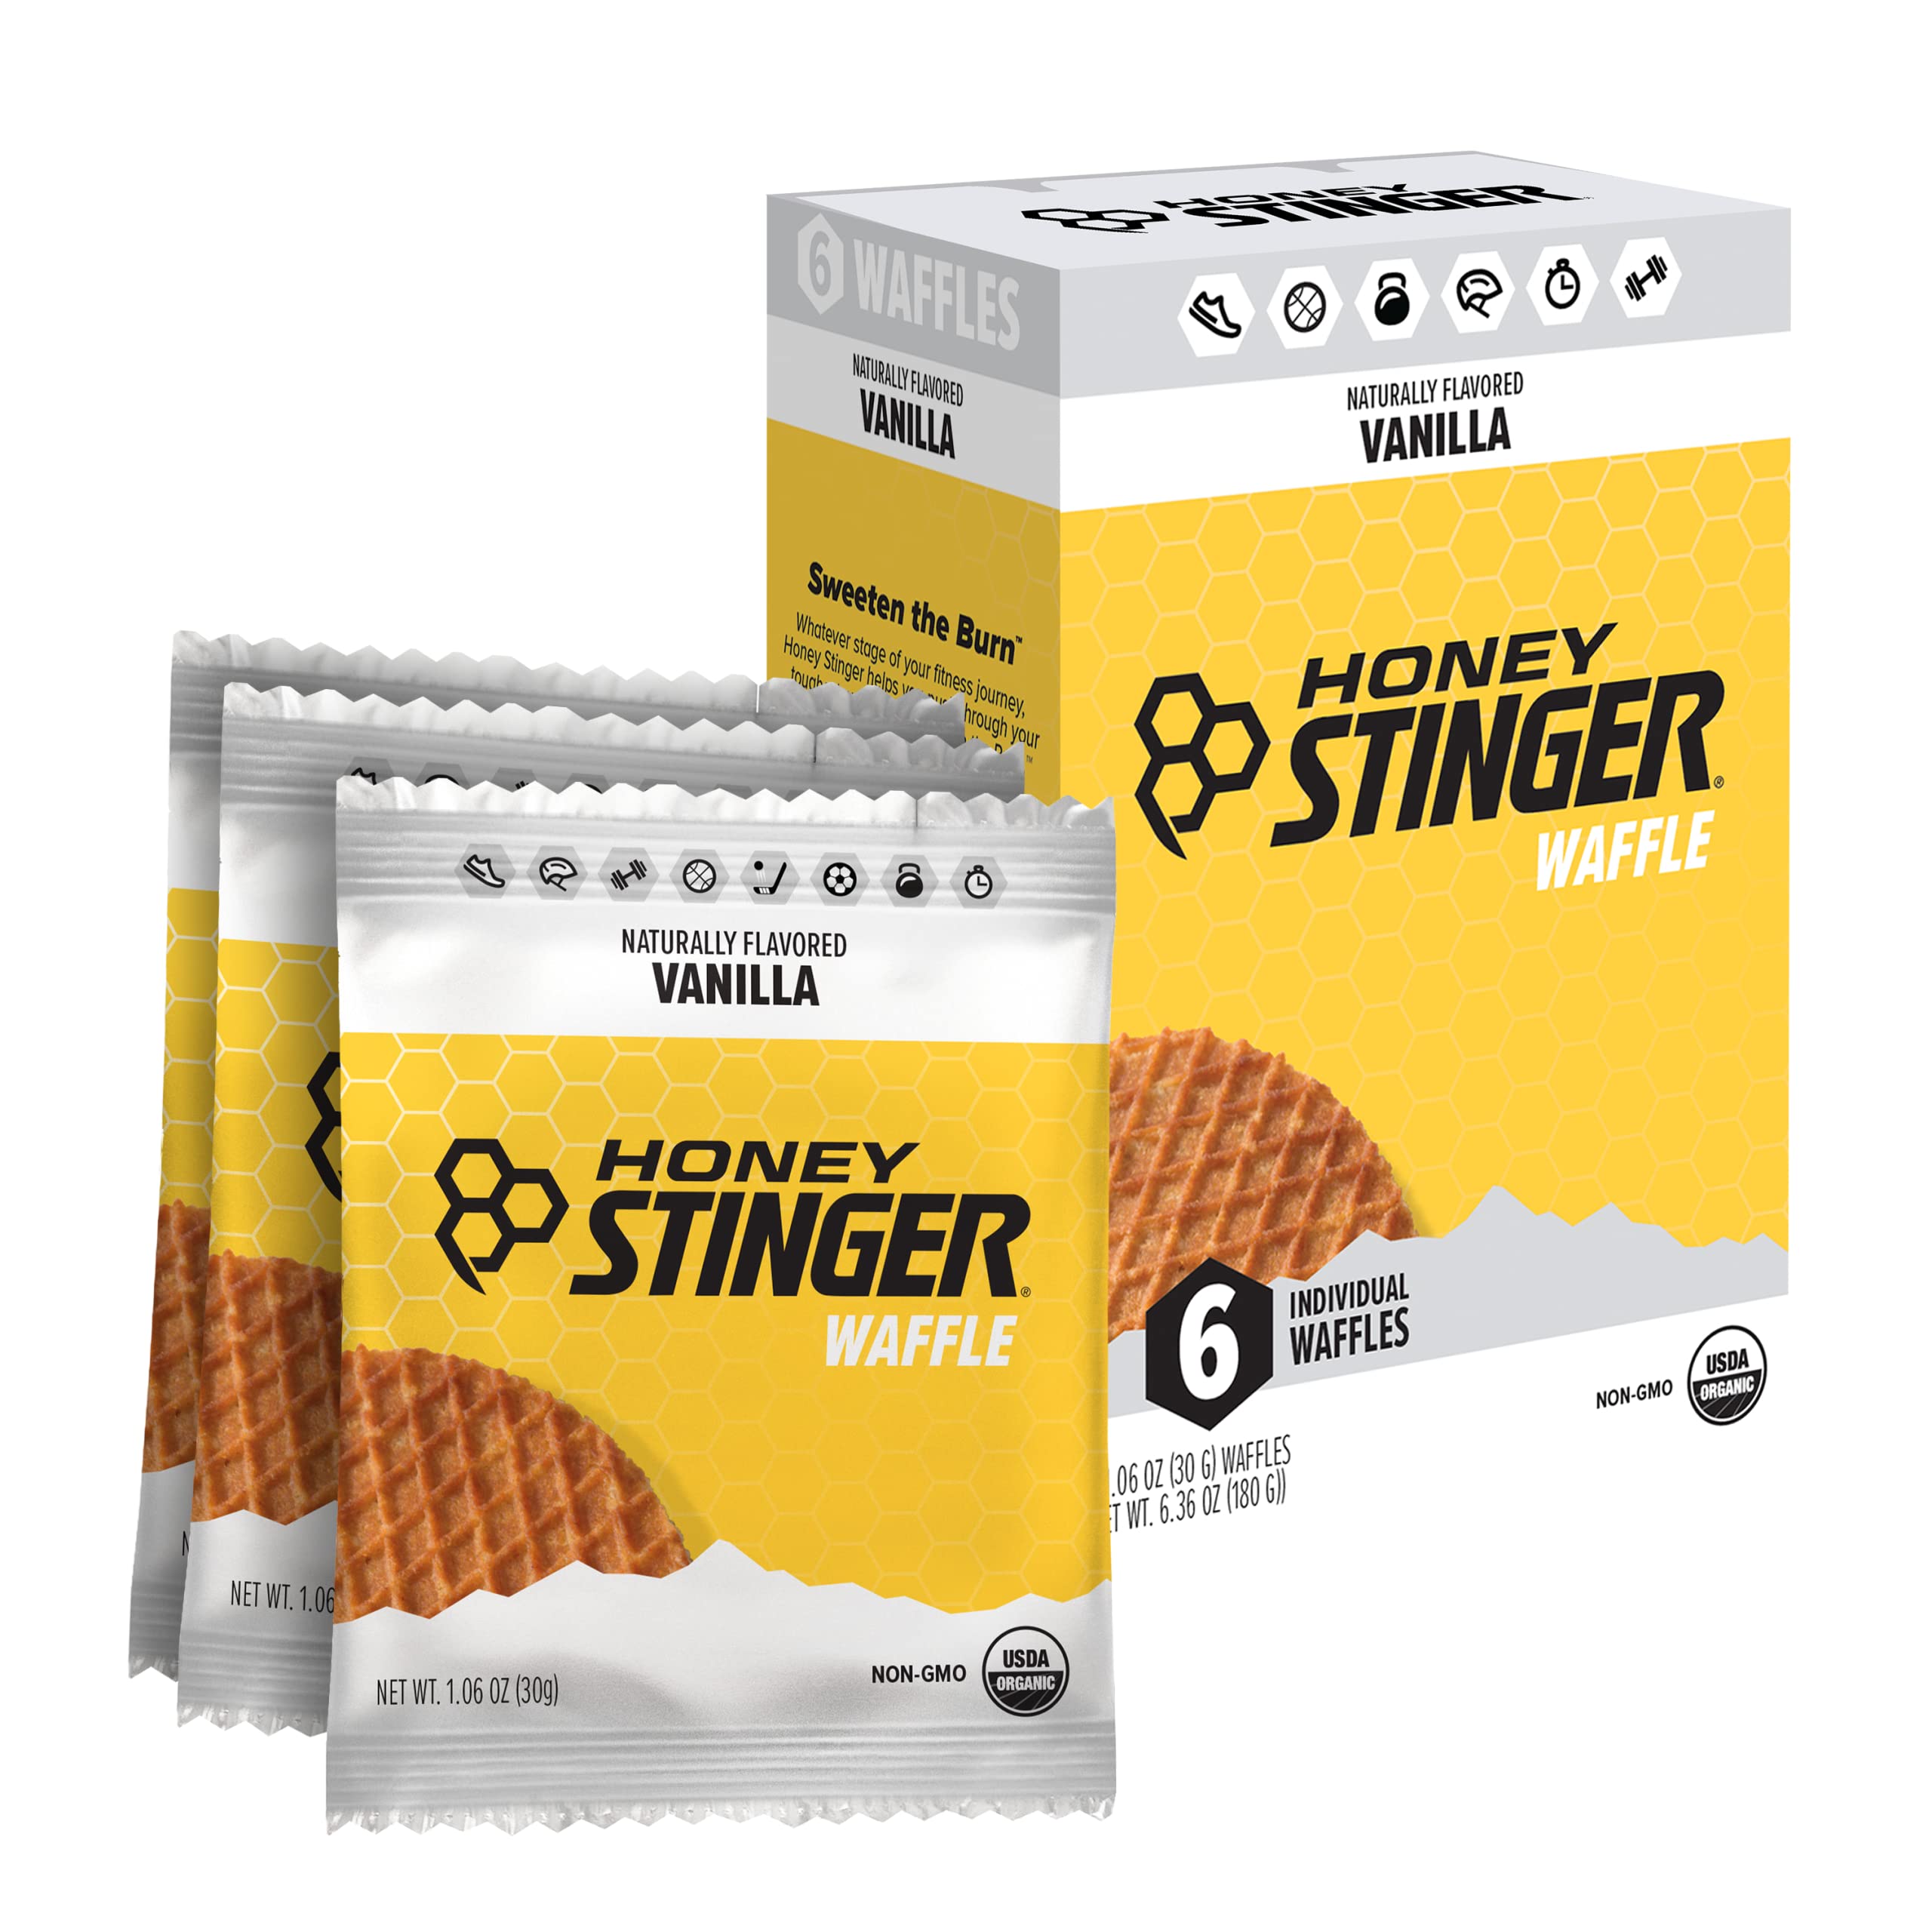 Honey Stinger Organic Vanilla Waffle | Energy Stroopwafel for Exercise, Endurance and Performance | Sports Nutrition for Home & Gym, Pre and Post Workout | Box of 6 Waffles, 6.36 Ounce